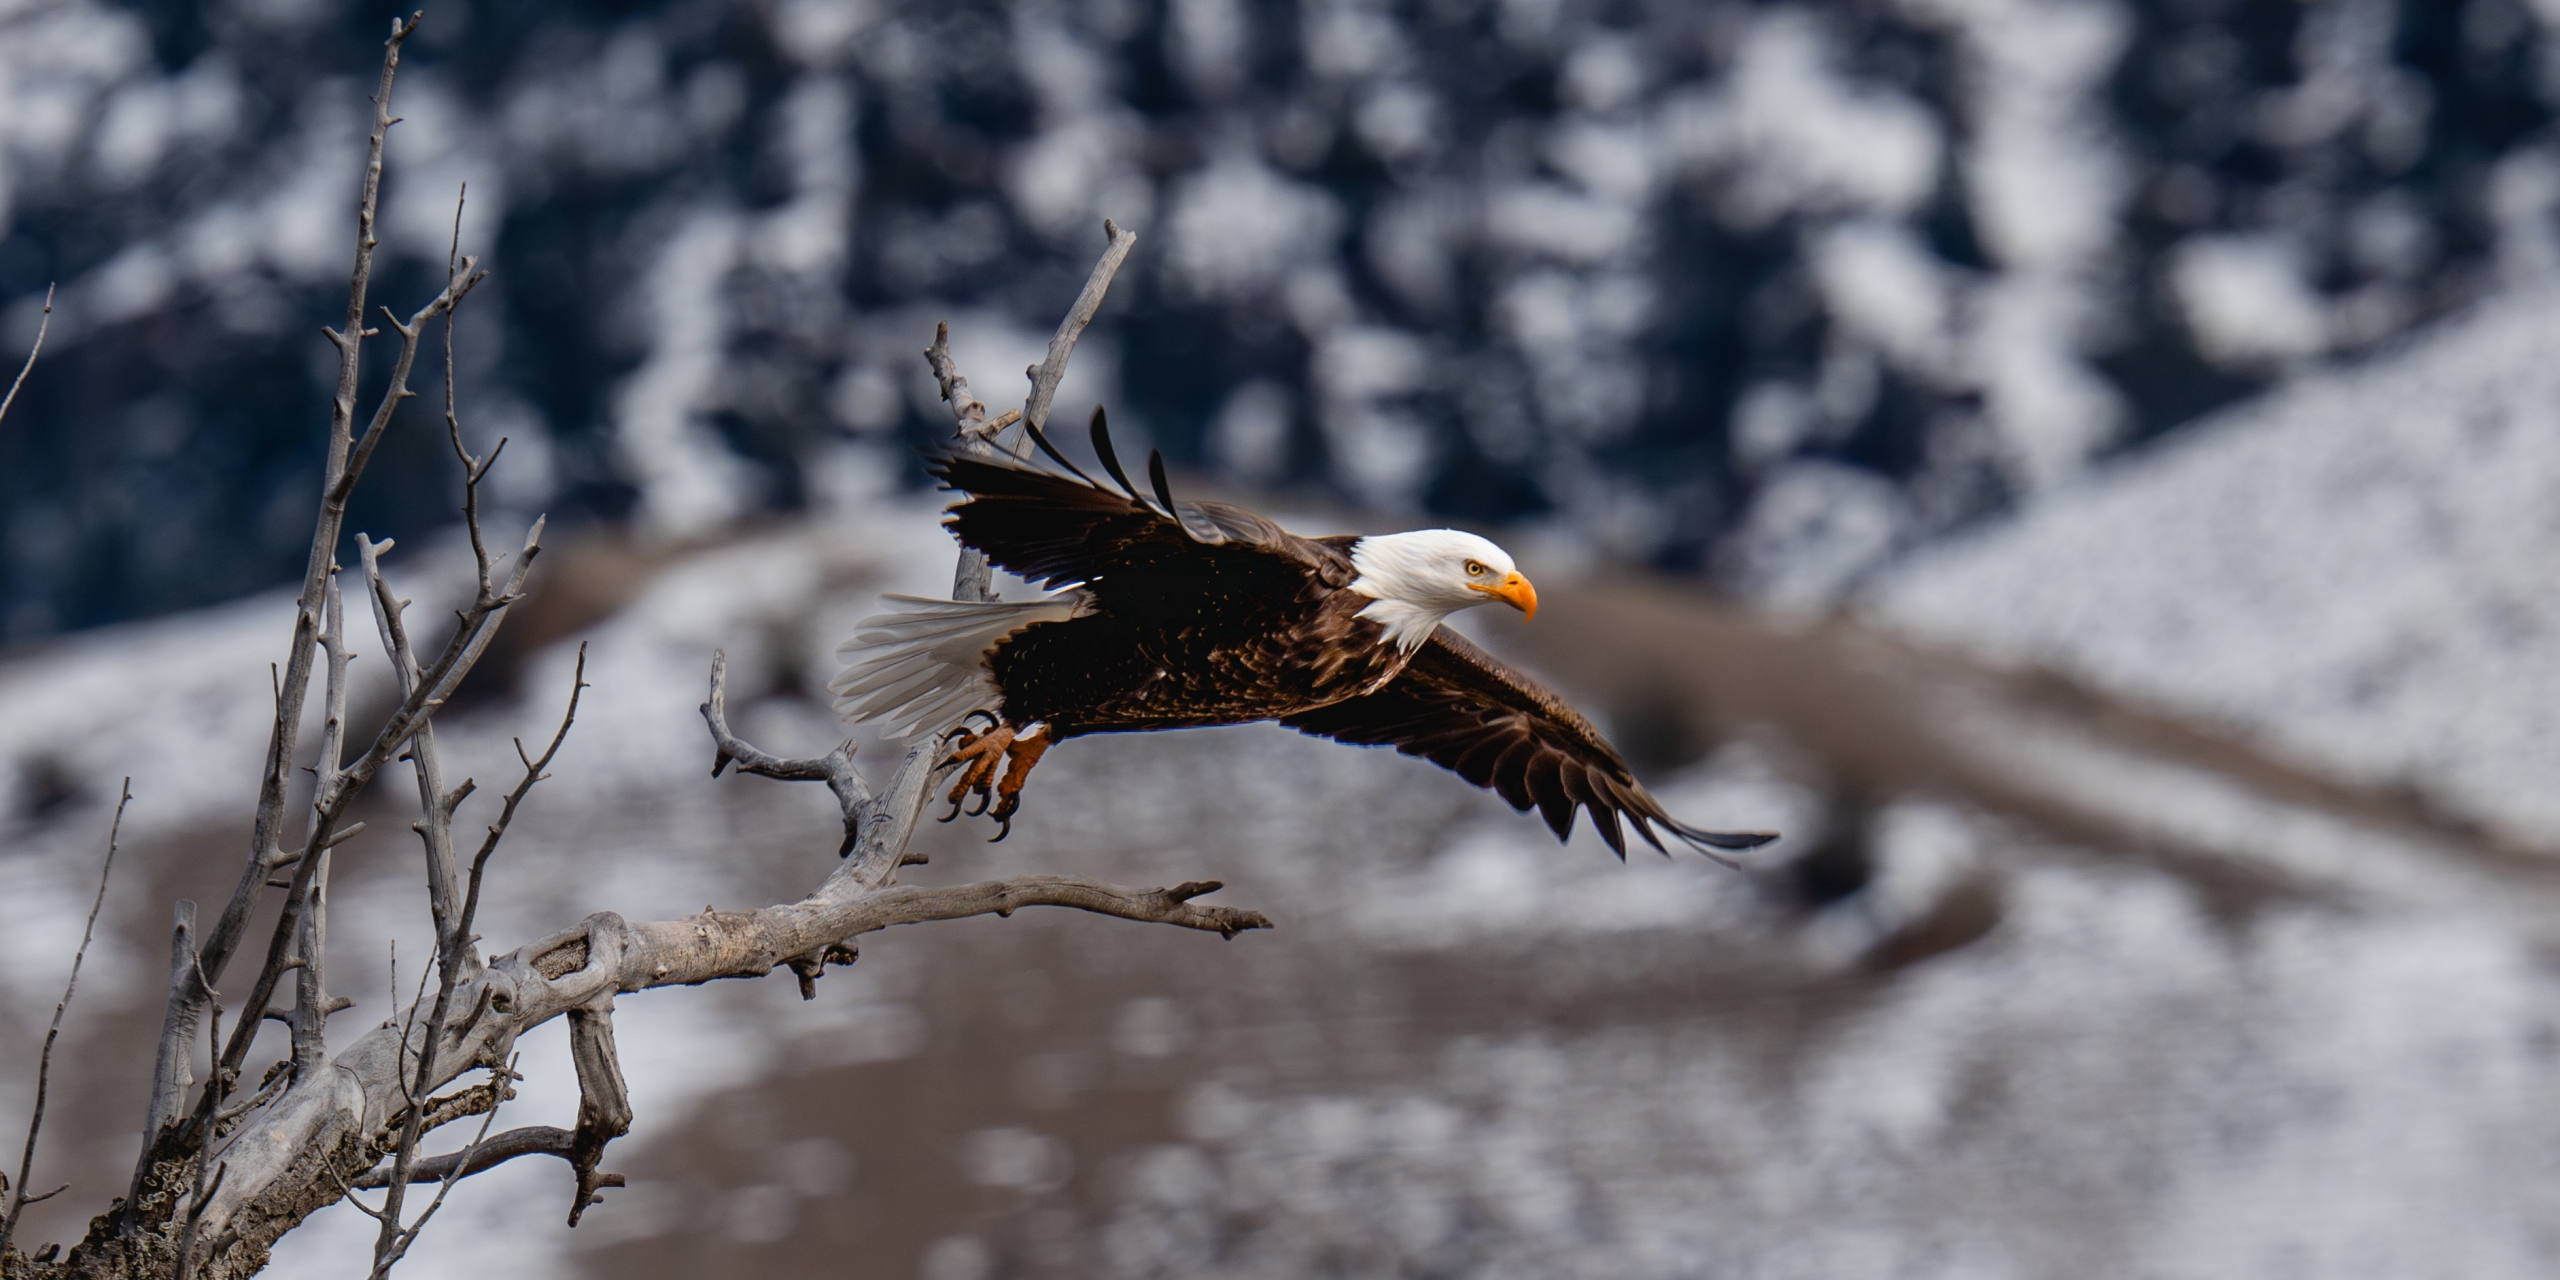 An eagle takes flight in Cody Yellowstone